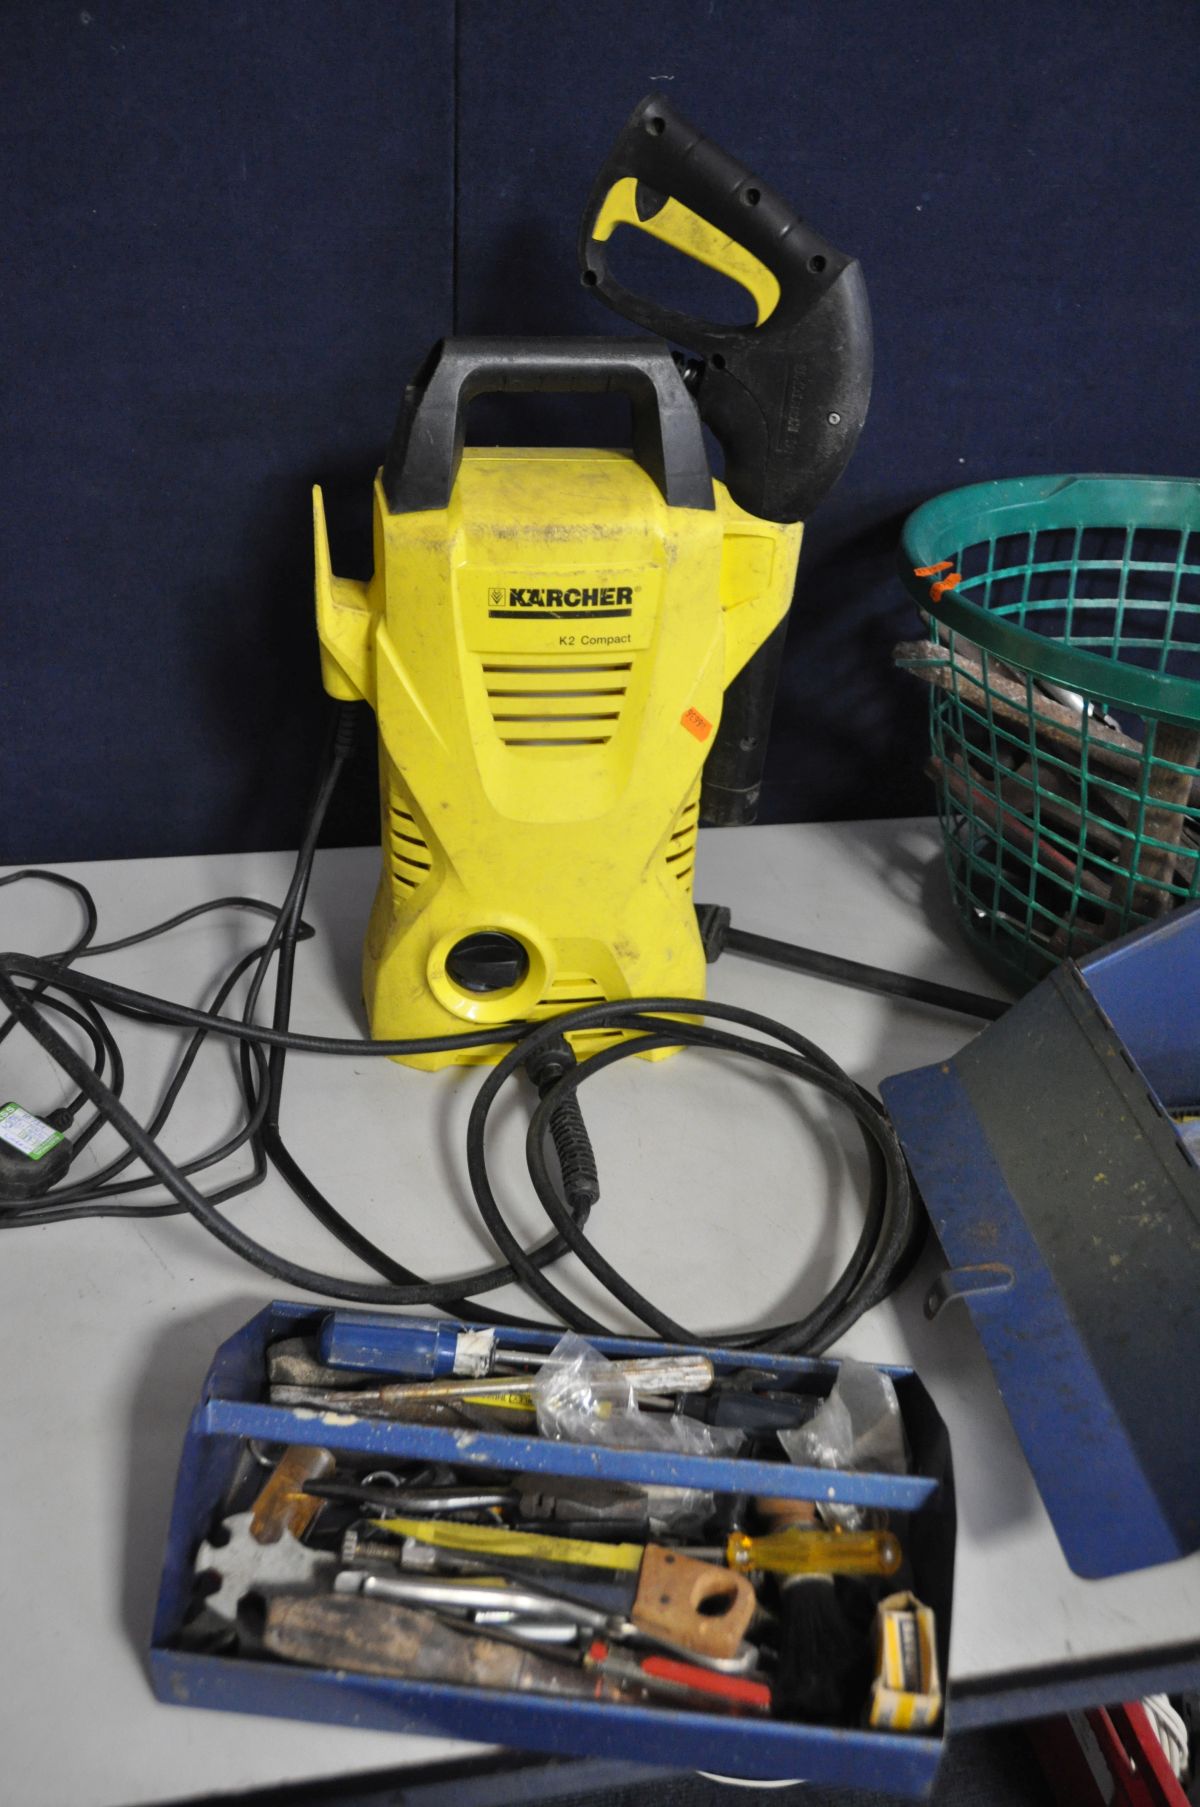 A KARCHER K2 COMPACT JET WASH (crack to outlet pipe) , Bosch Heat Gun, a Black and Decker Drill (all - Image 2 of 5